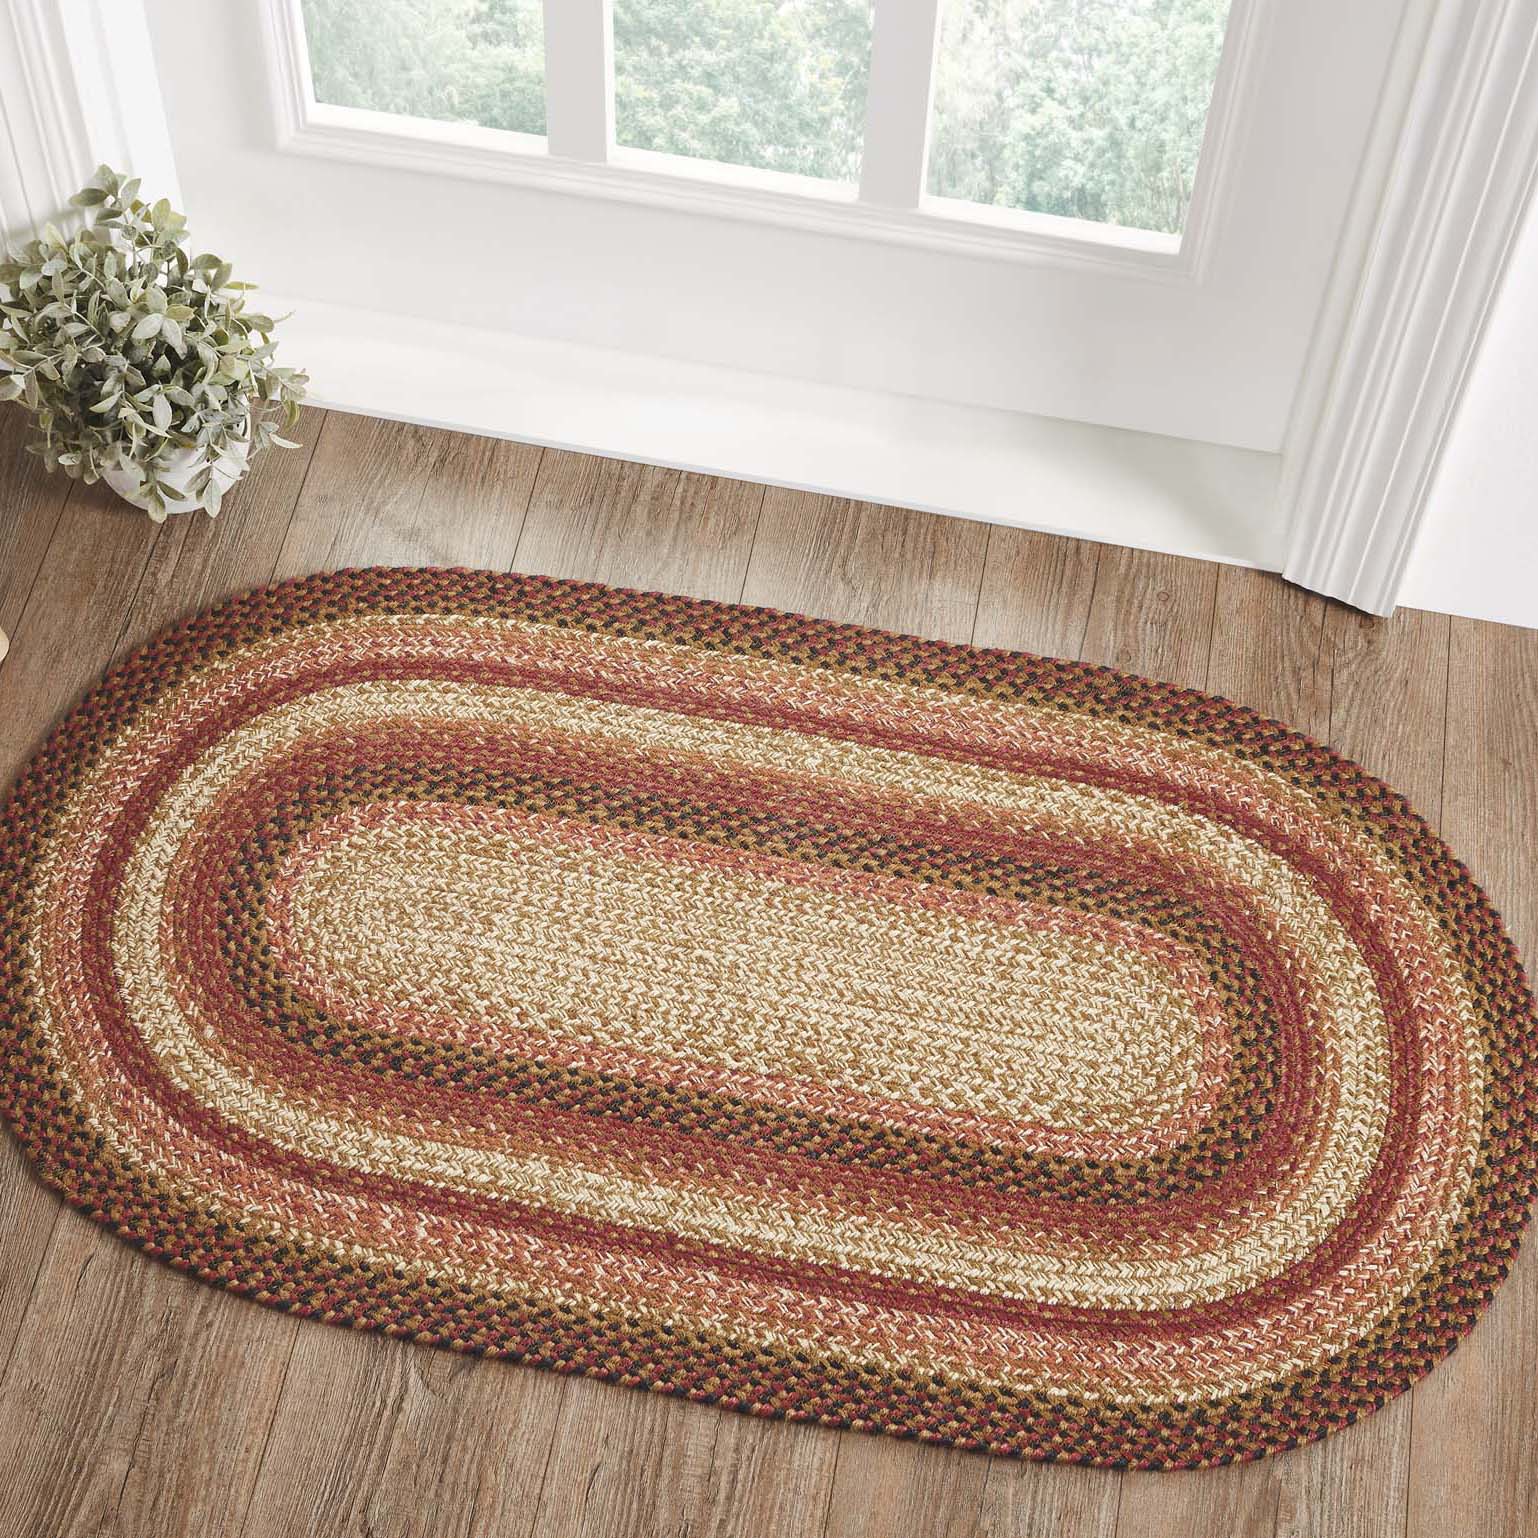 Ginger spice oval braided rug 27x48